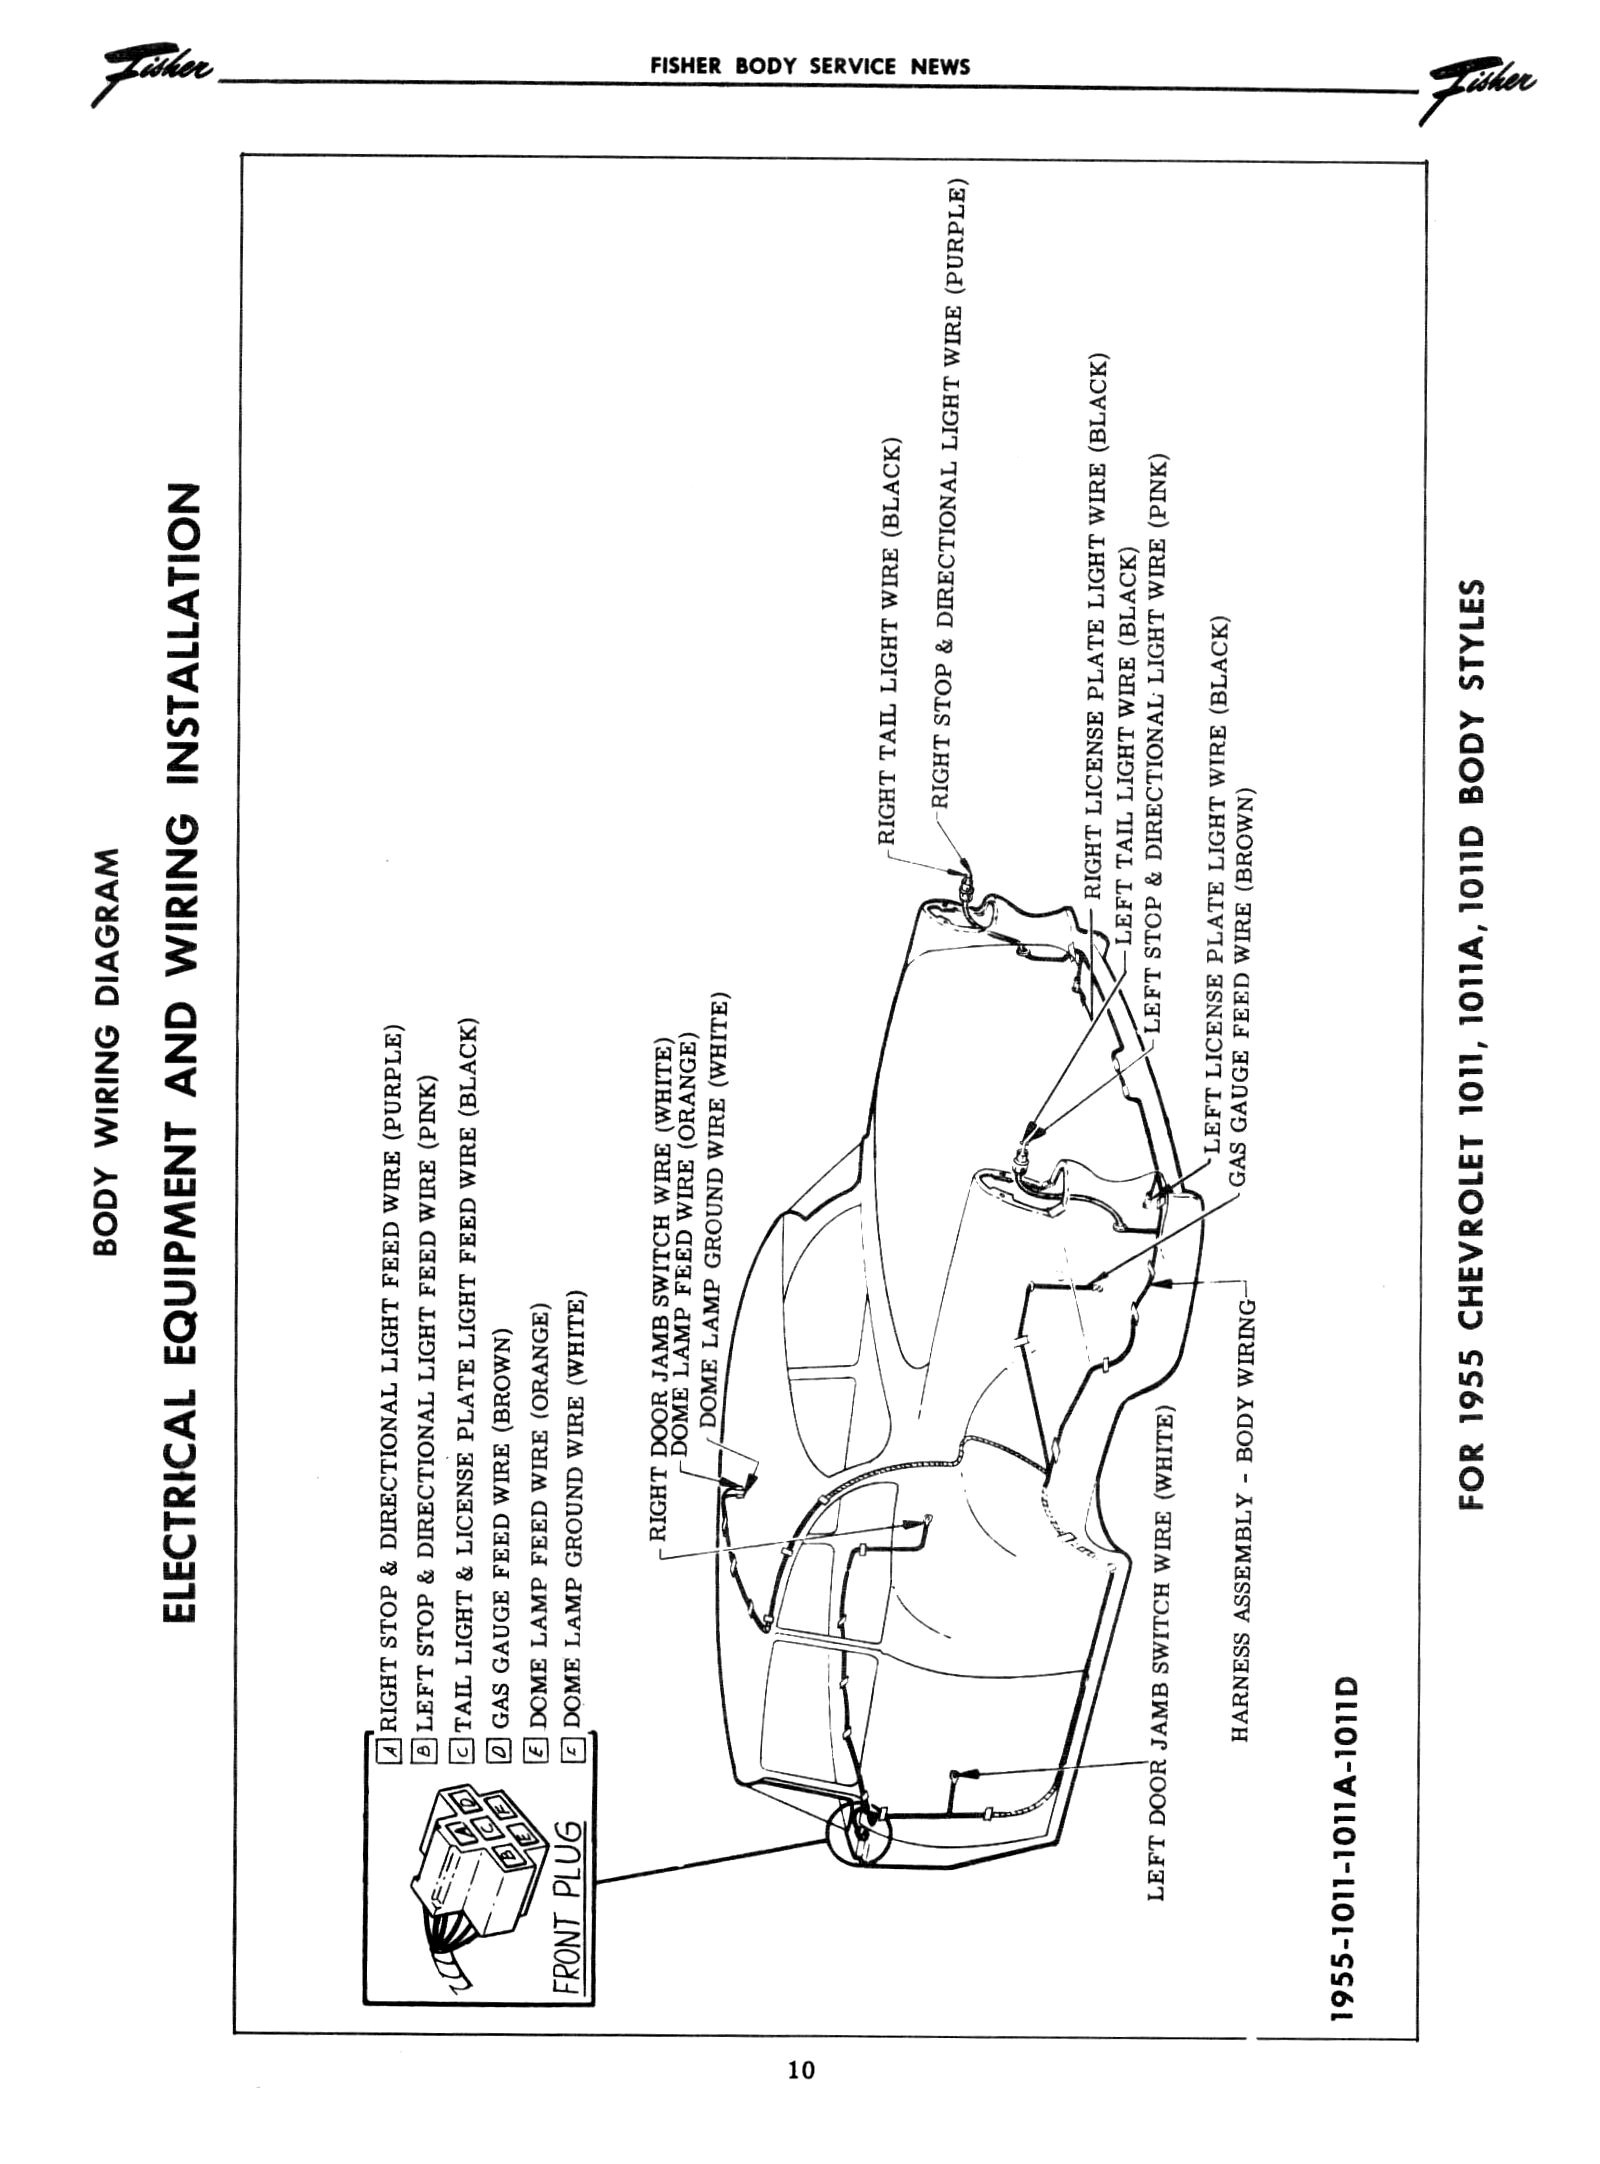 Chevy Wiring Diagrams - Dome Light Wiring Diagram